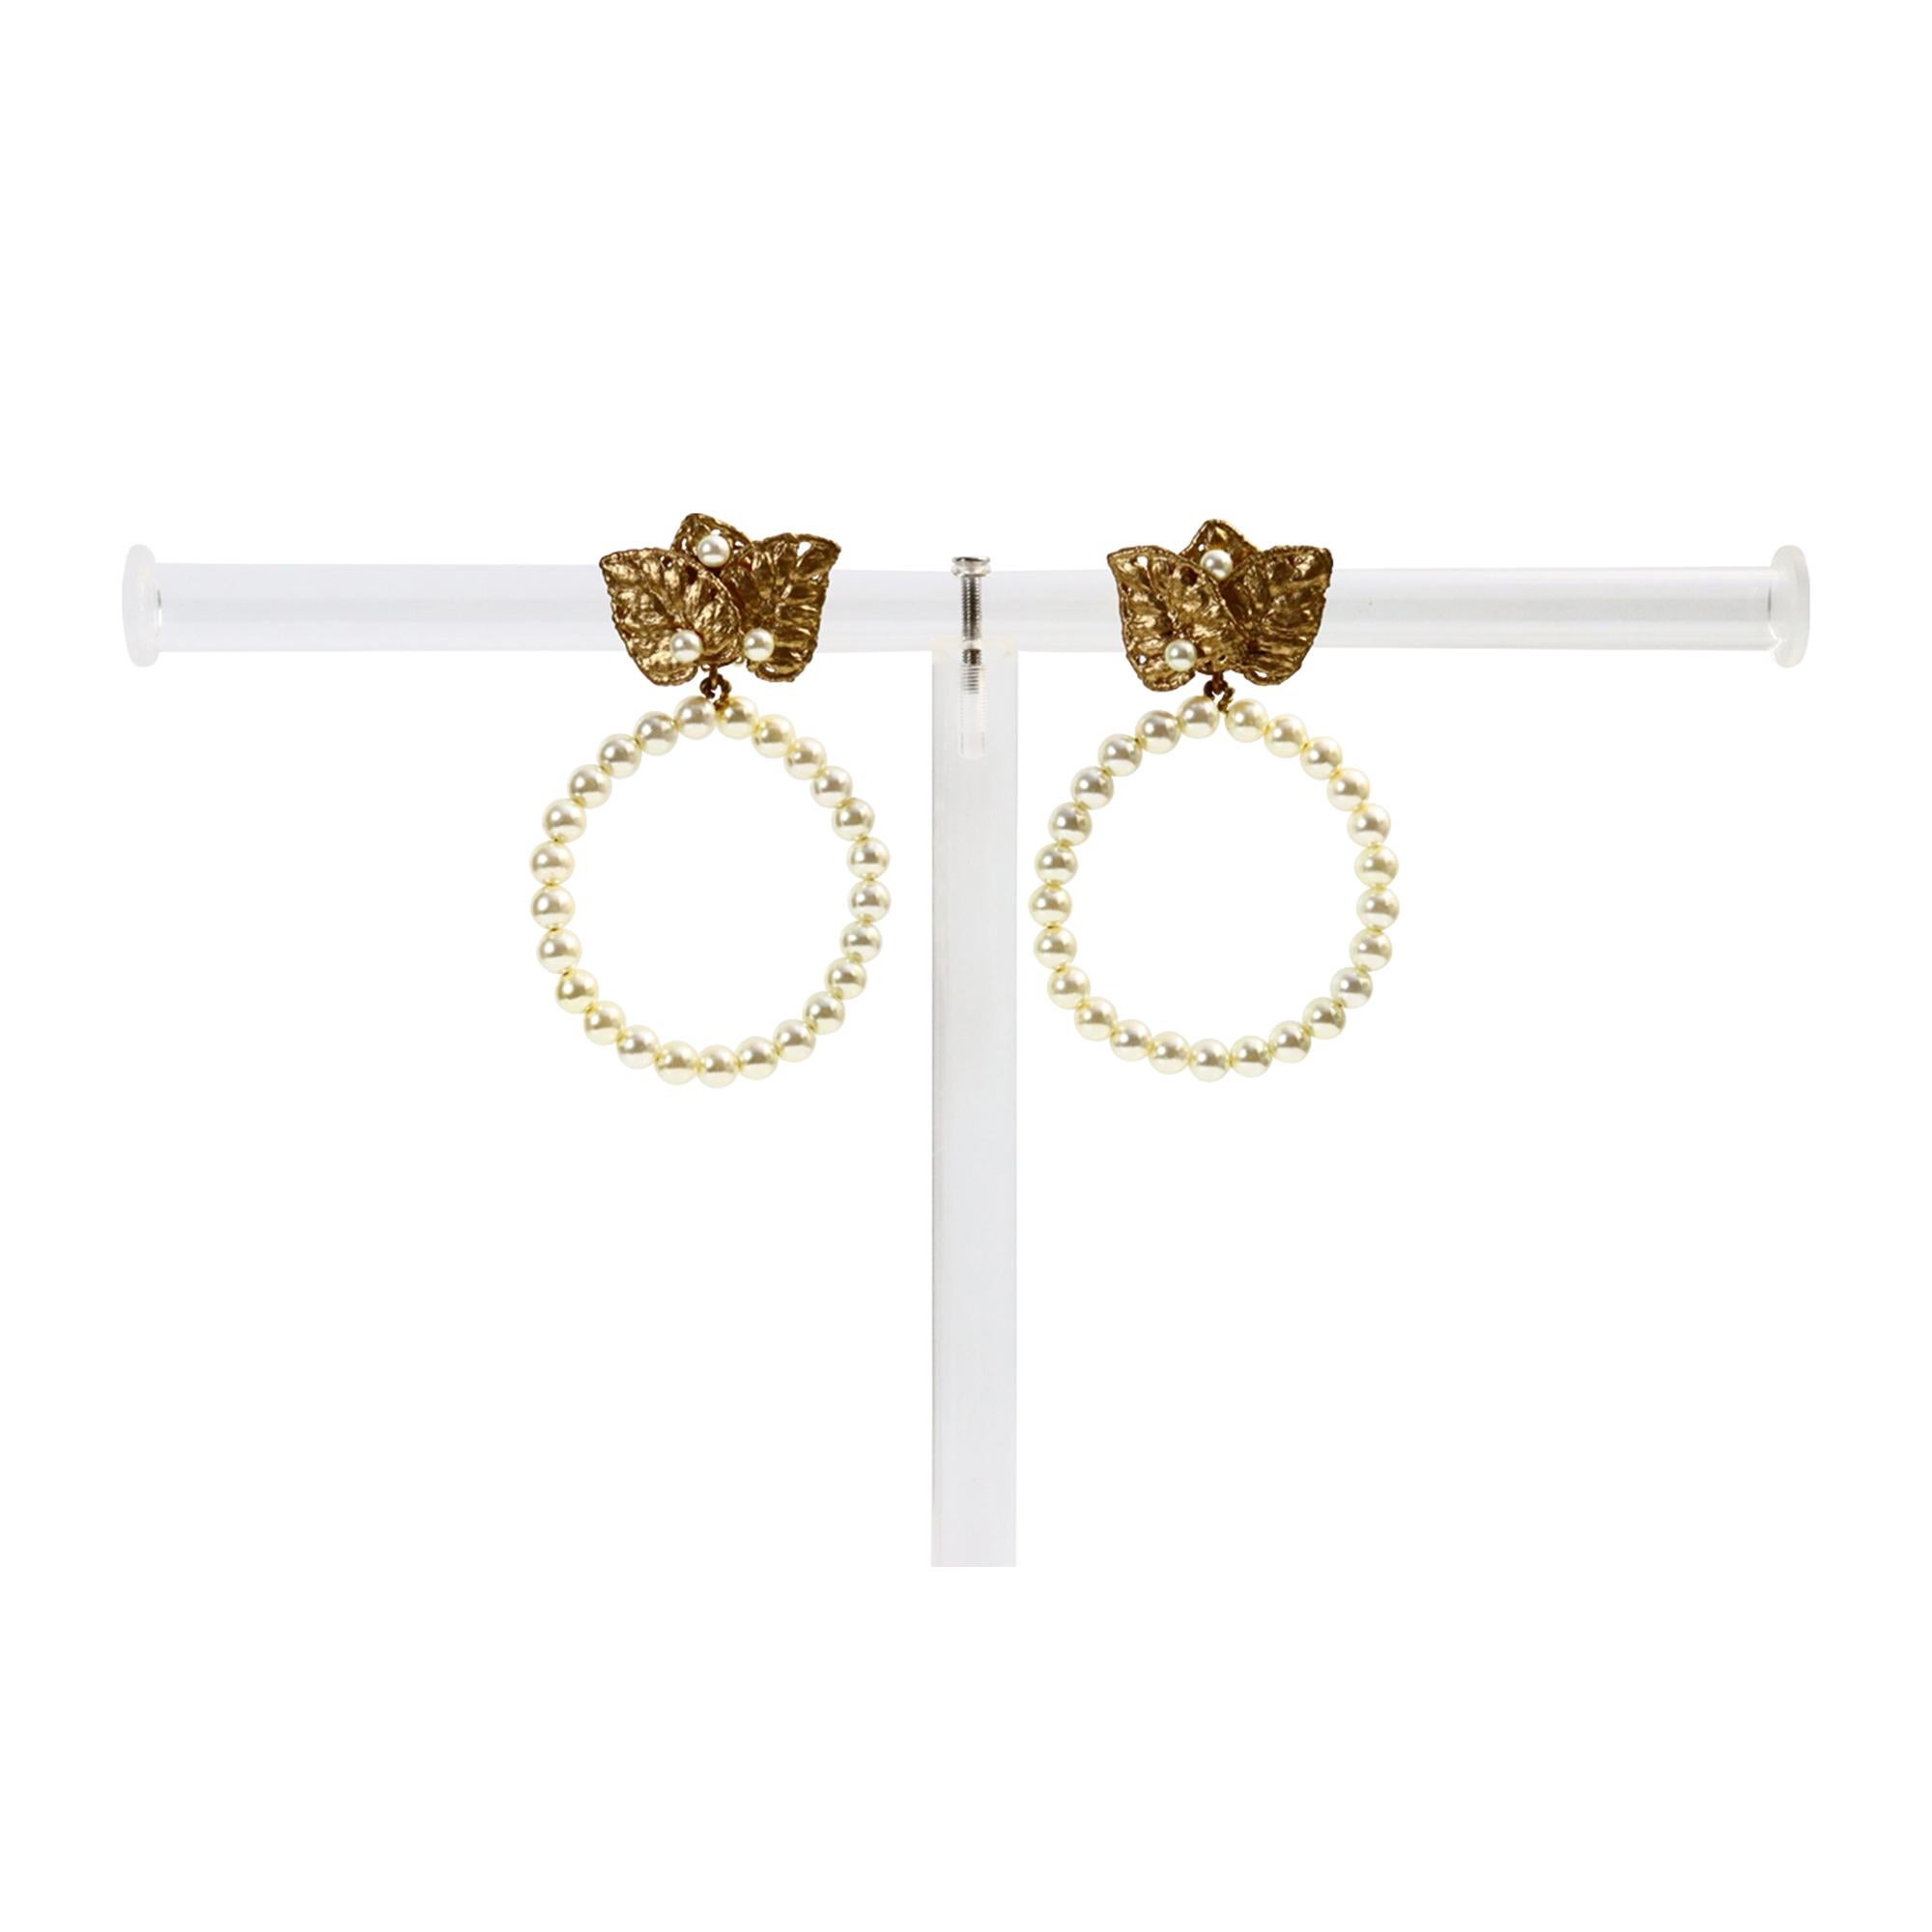 Vintage Martha Montero Gold and Faux Pearl Dangling Hoop Earrings Circa 1980s For Sale 3